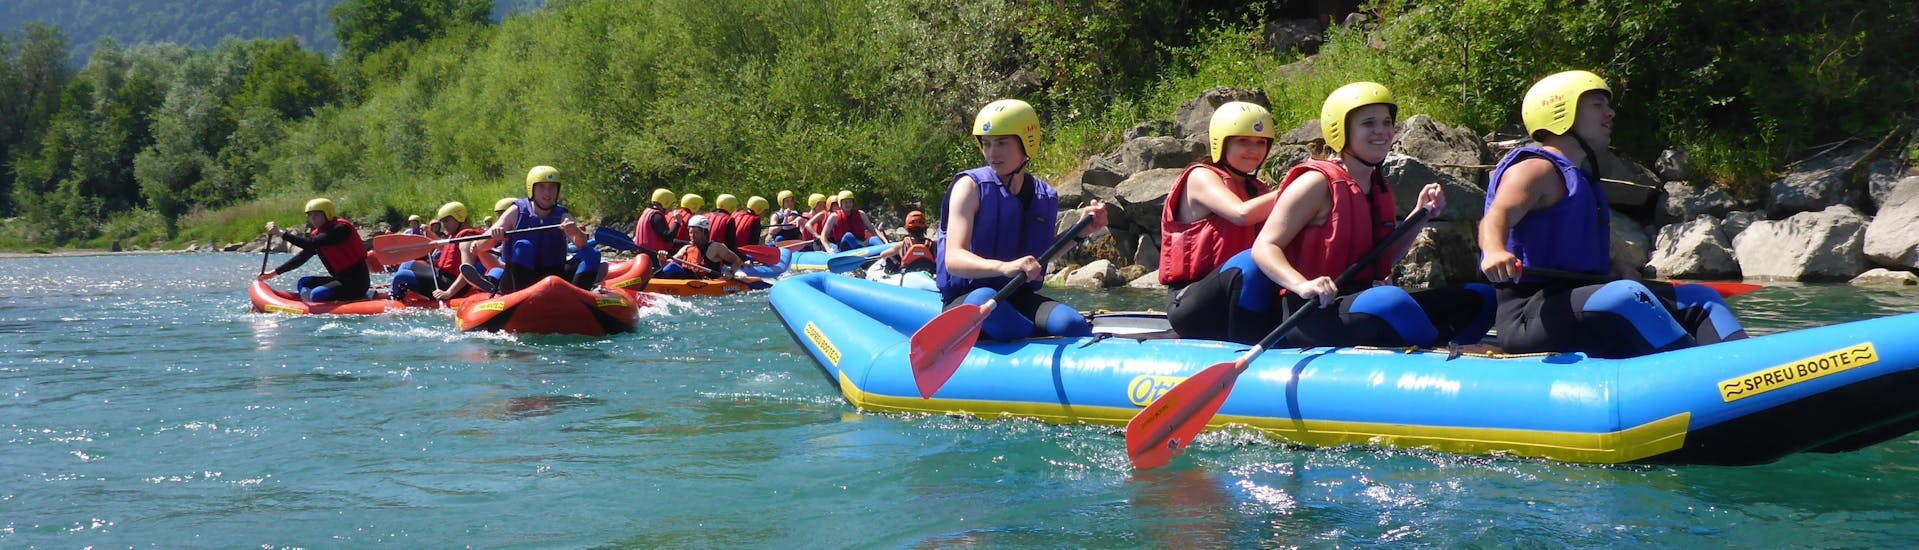 Friends having fun during the the Canadier-Rafting on the Iller River in Allgäu with Spirits of Nature Allgäu.